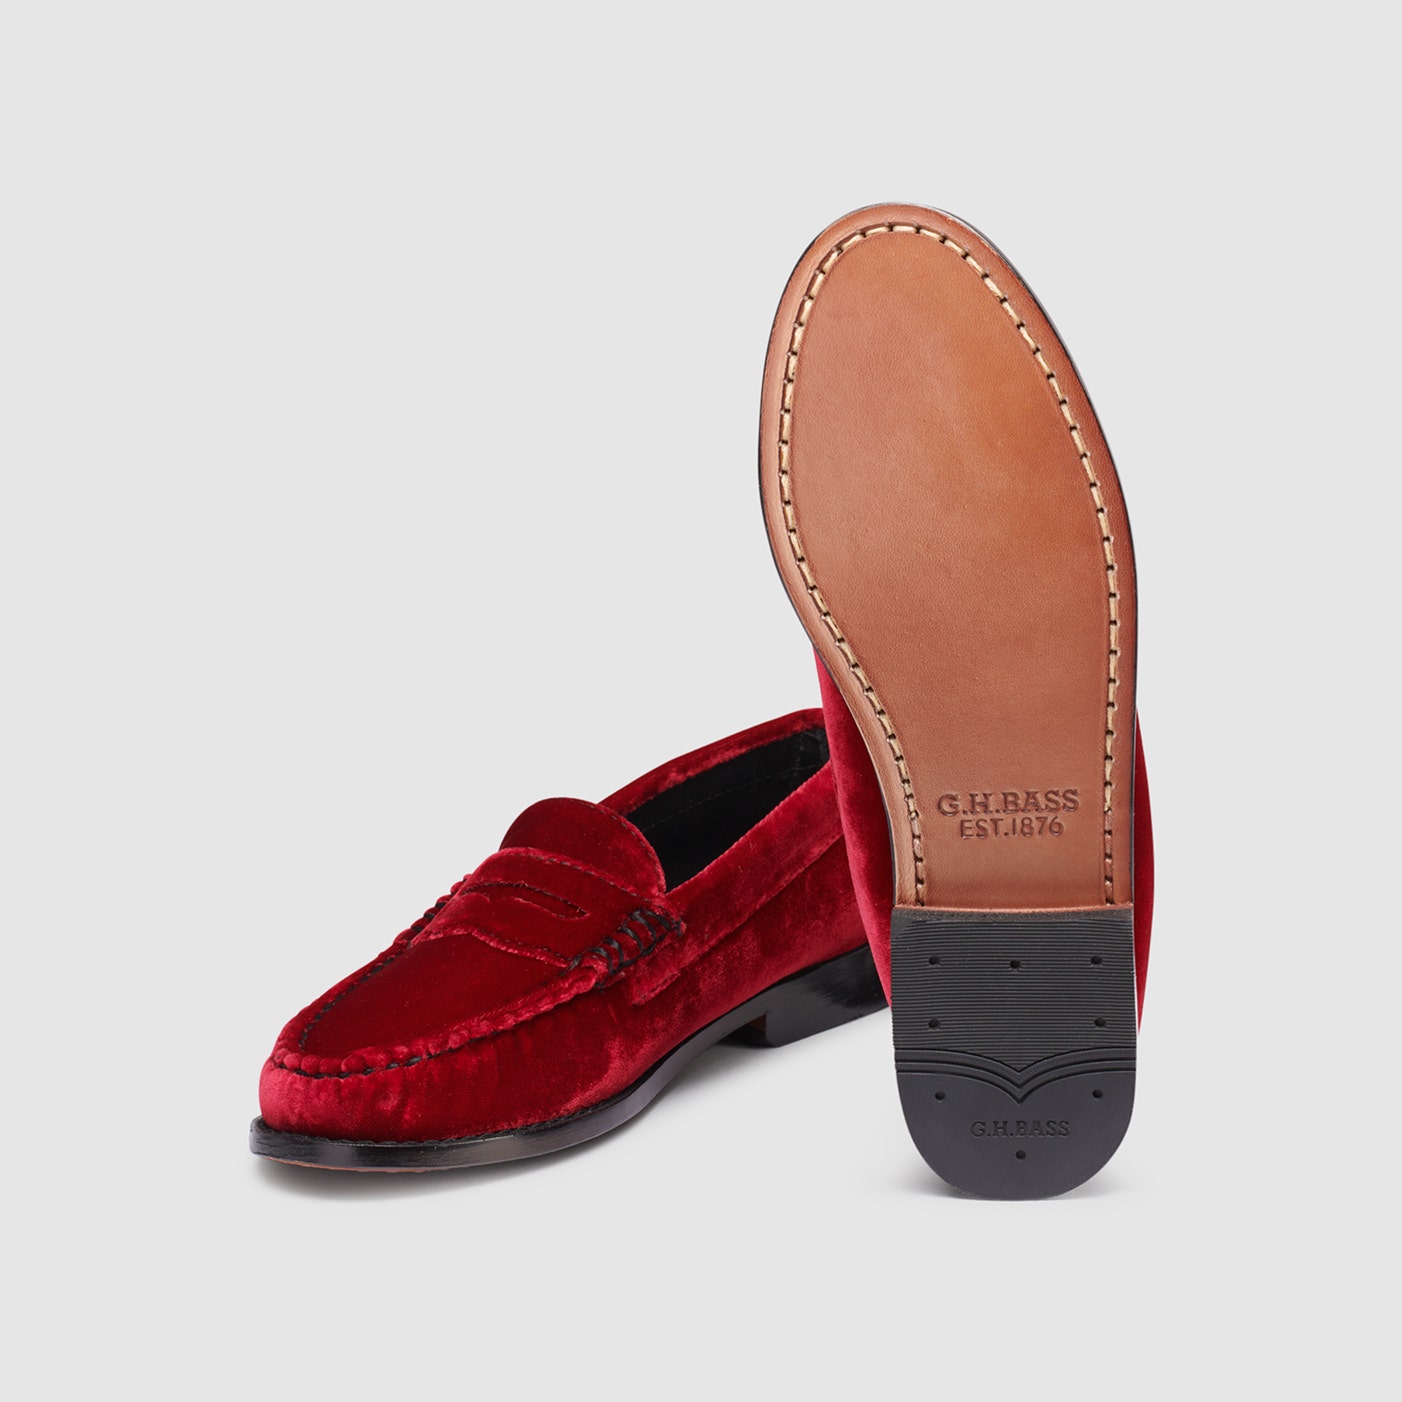 G.H Bass Whitney Velvet Weejuns Loafer in Wine BAX3W016 | Shop from eightywingold an official brand partner for G.H. Bass in Canada and US.